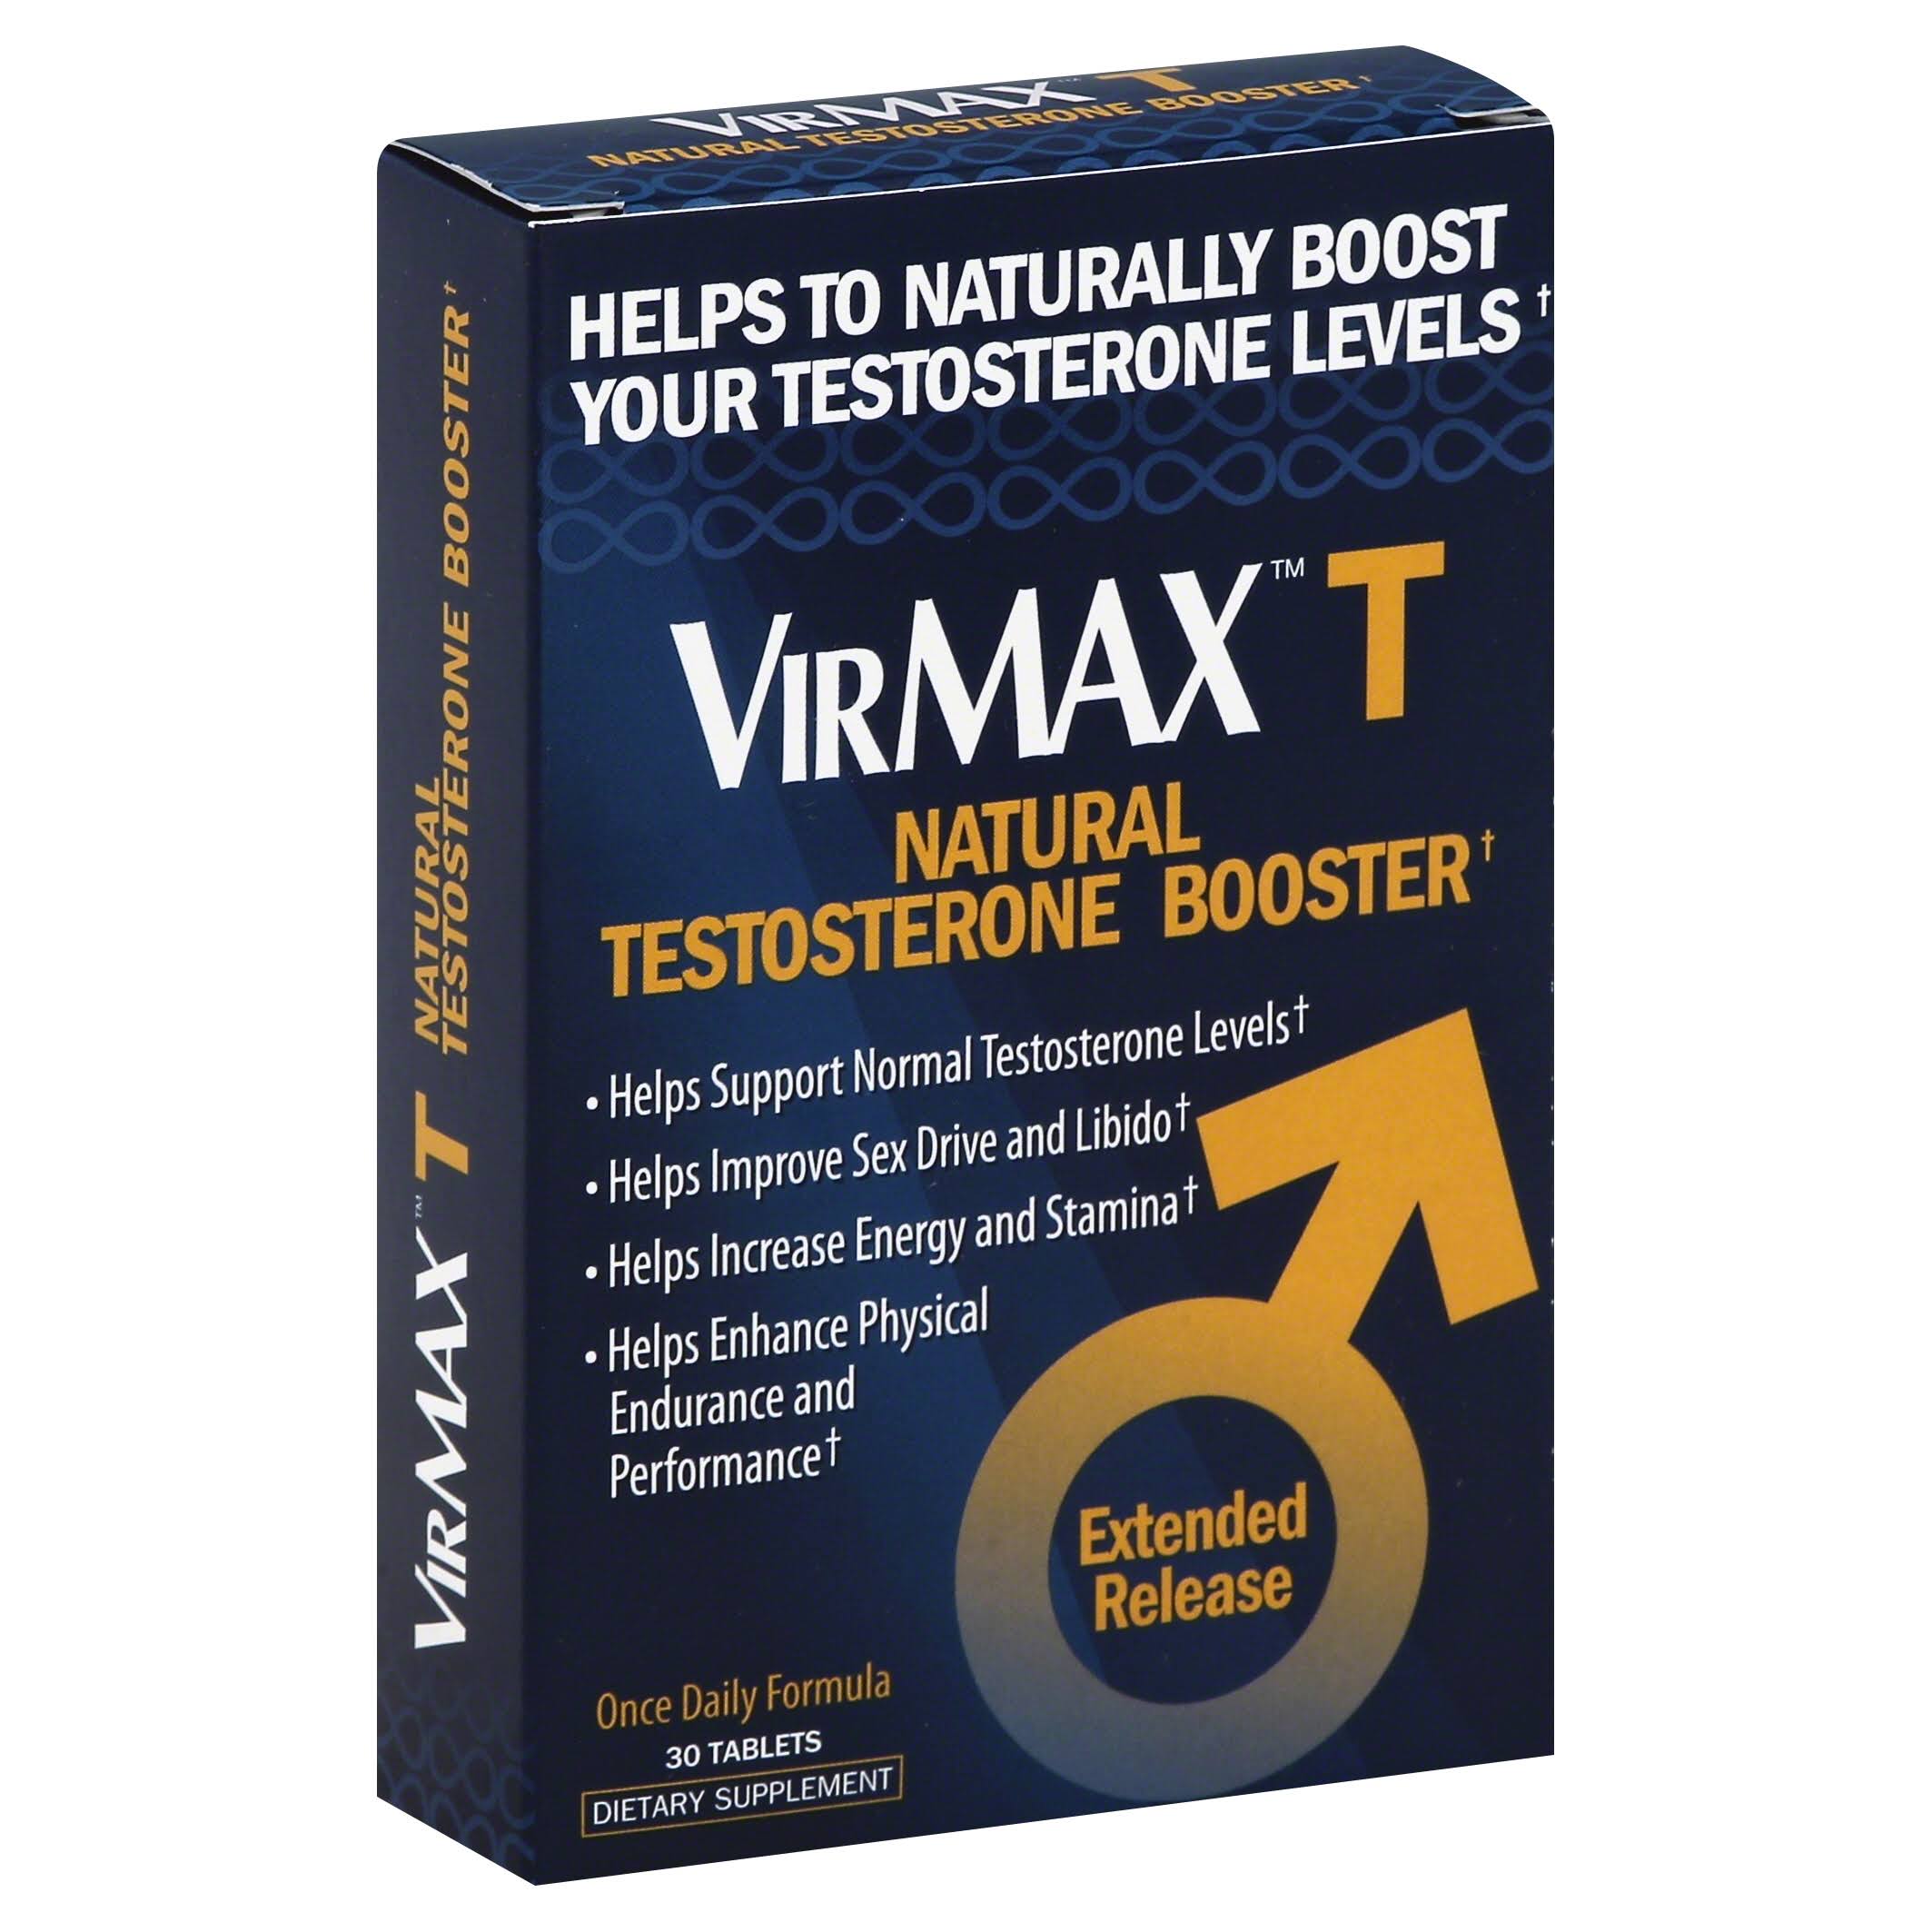 VirMax T Natural Testosterone Booster - x30